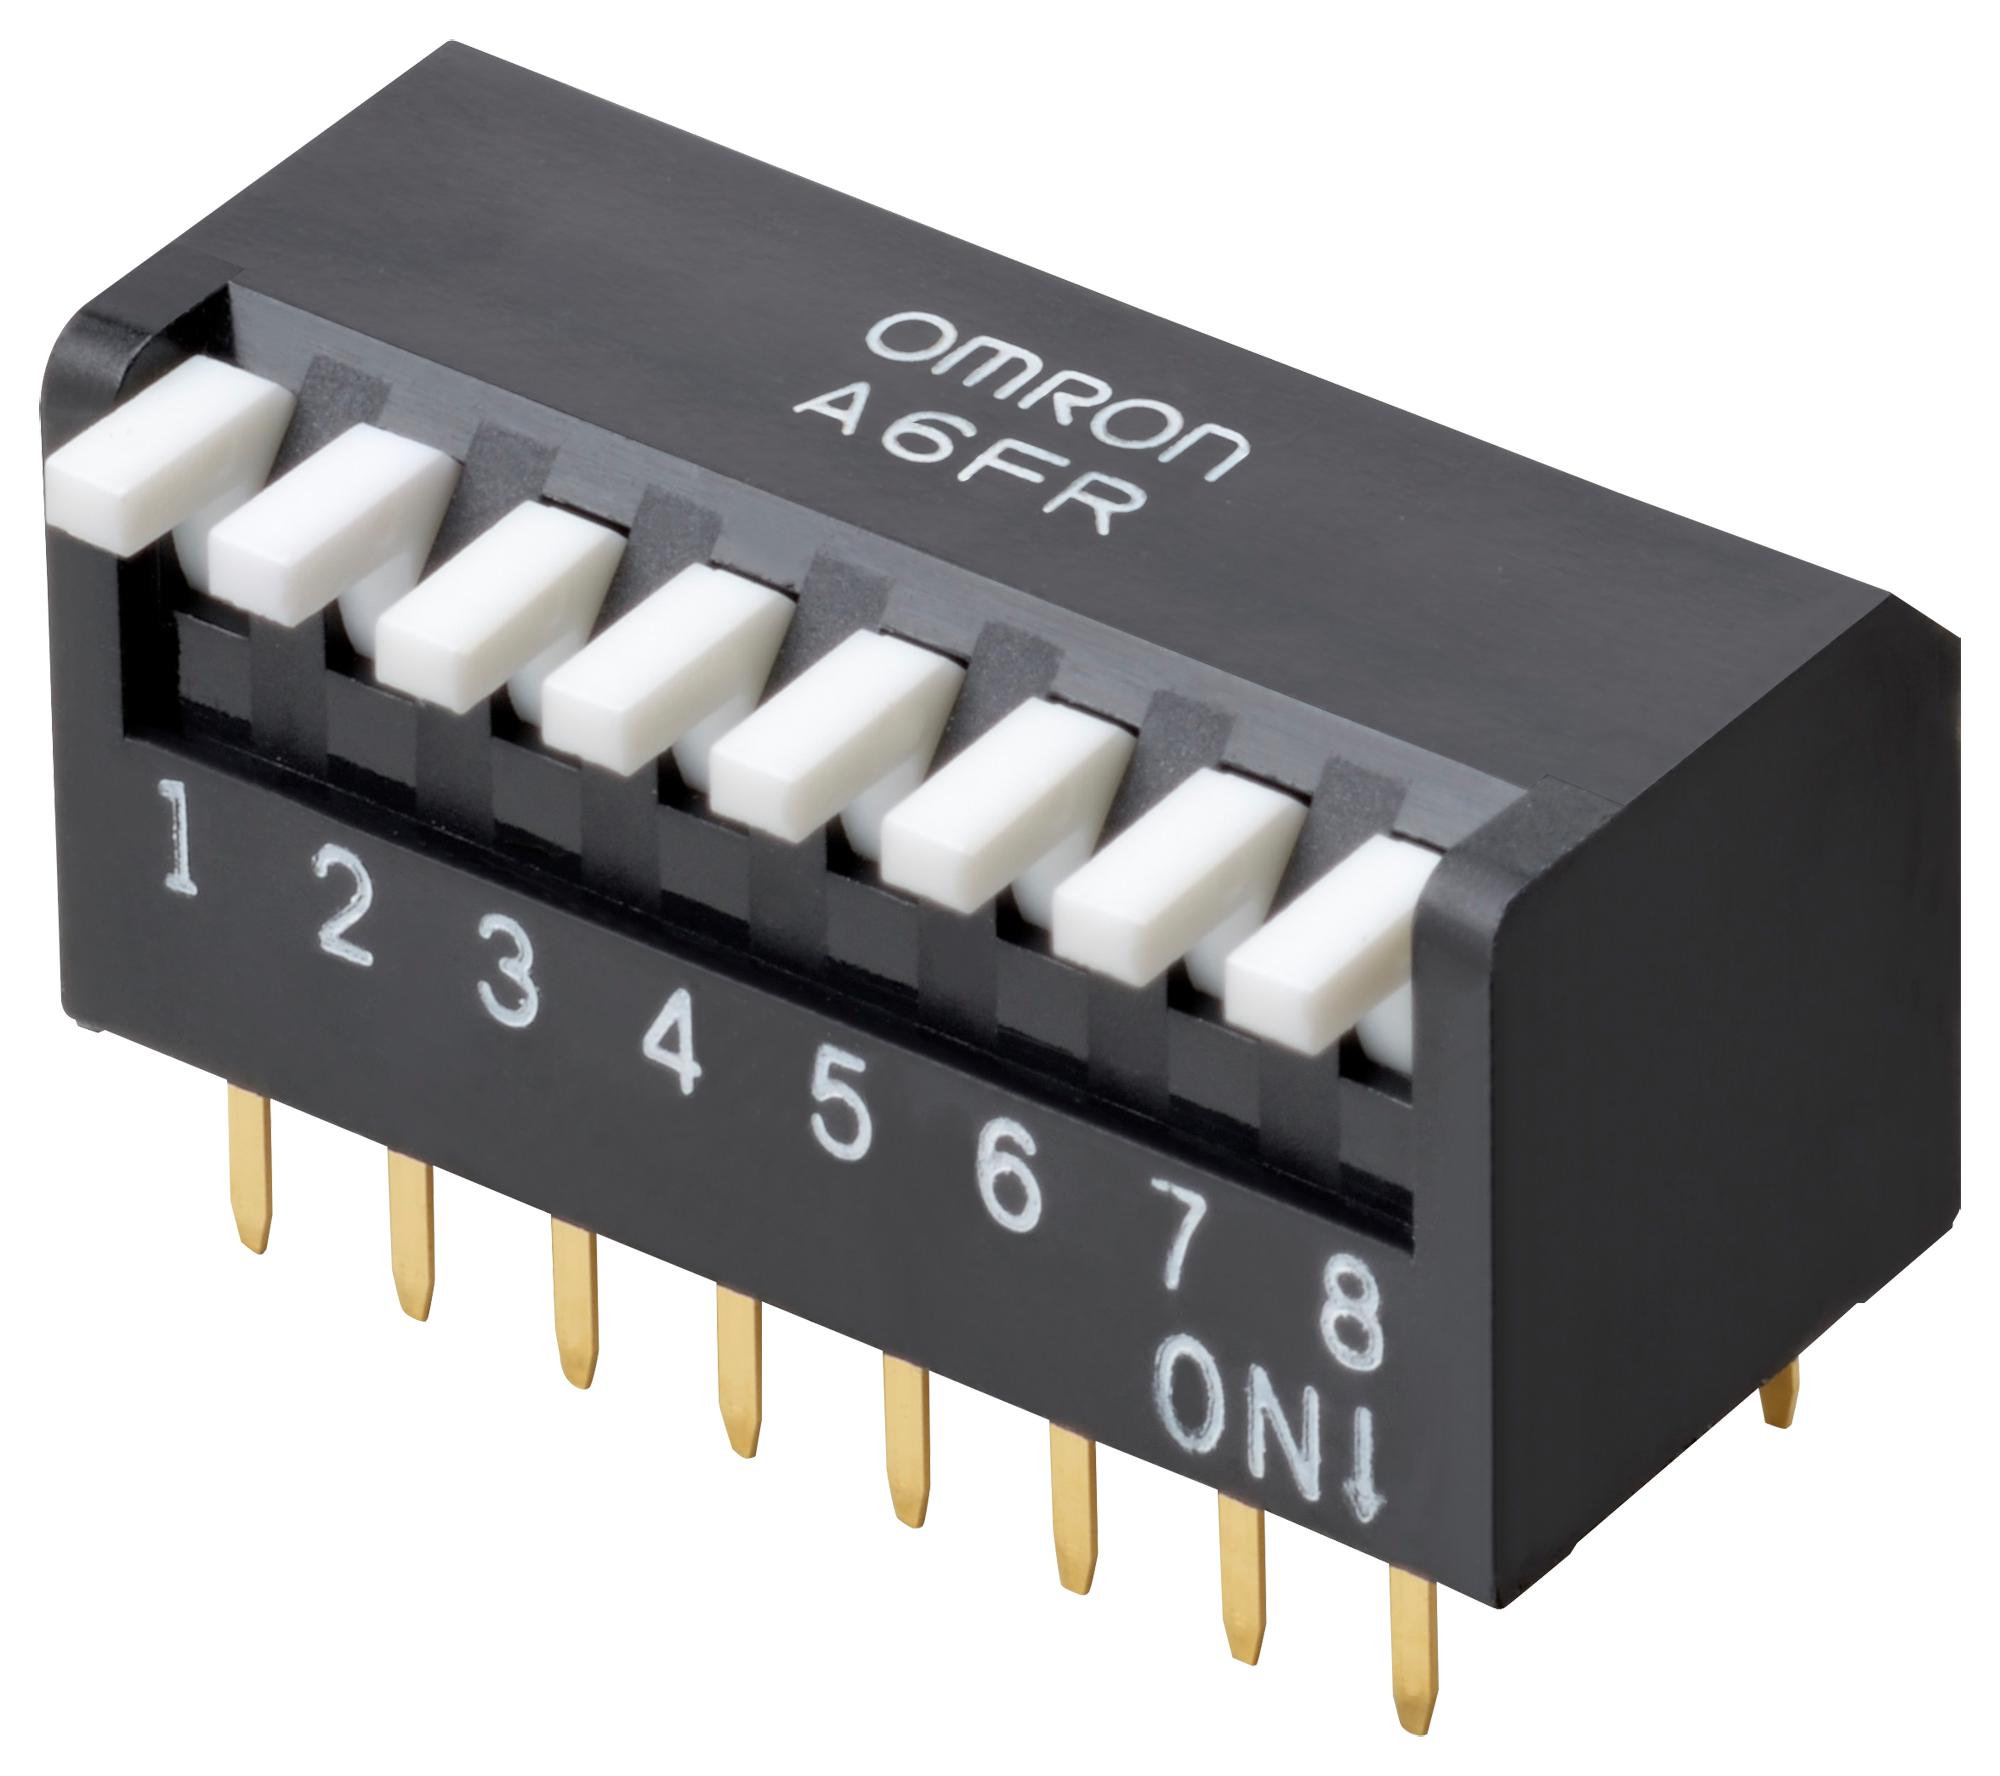 A6FR-3104 DIP SWITCH, 3POS, SPST, PIANO KEY, TH OMRON